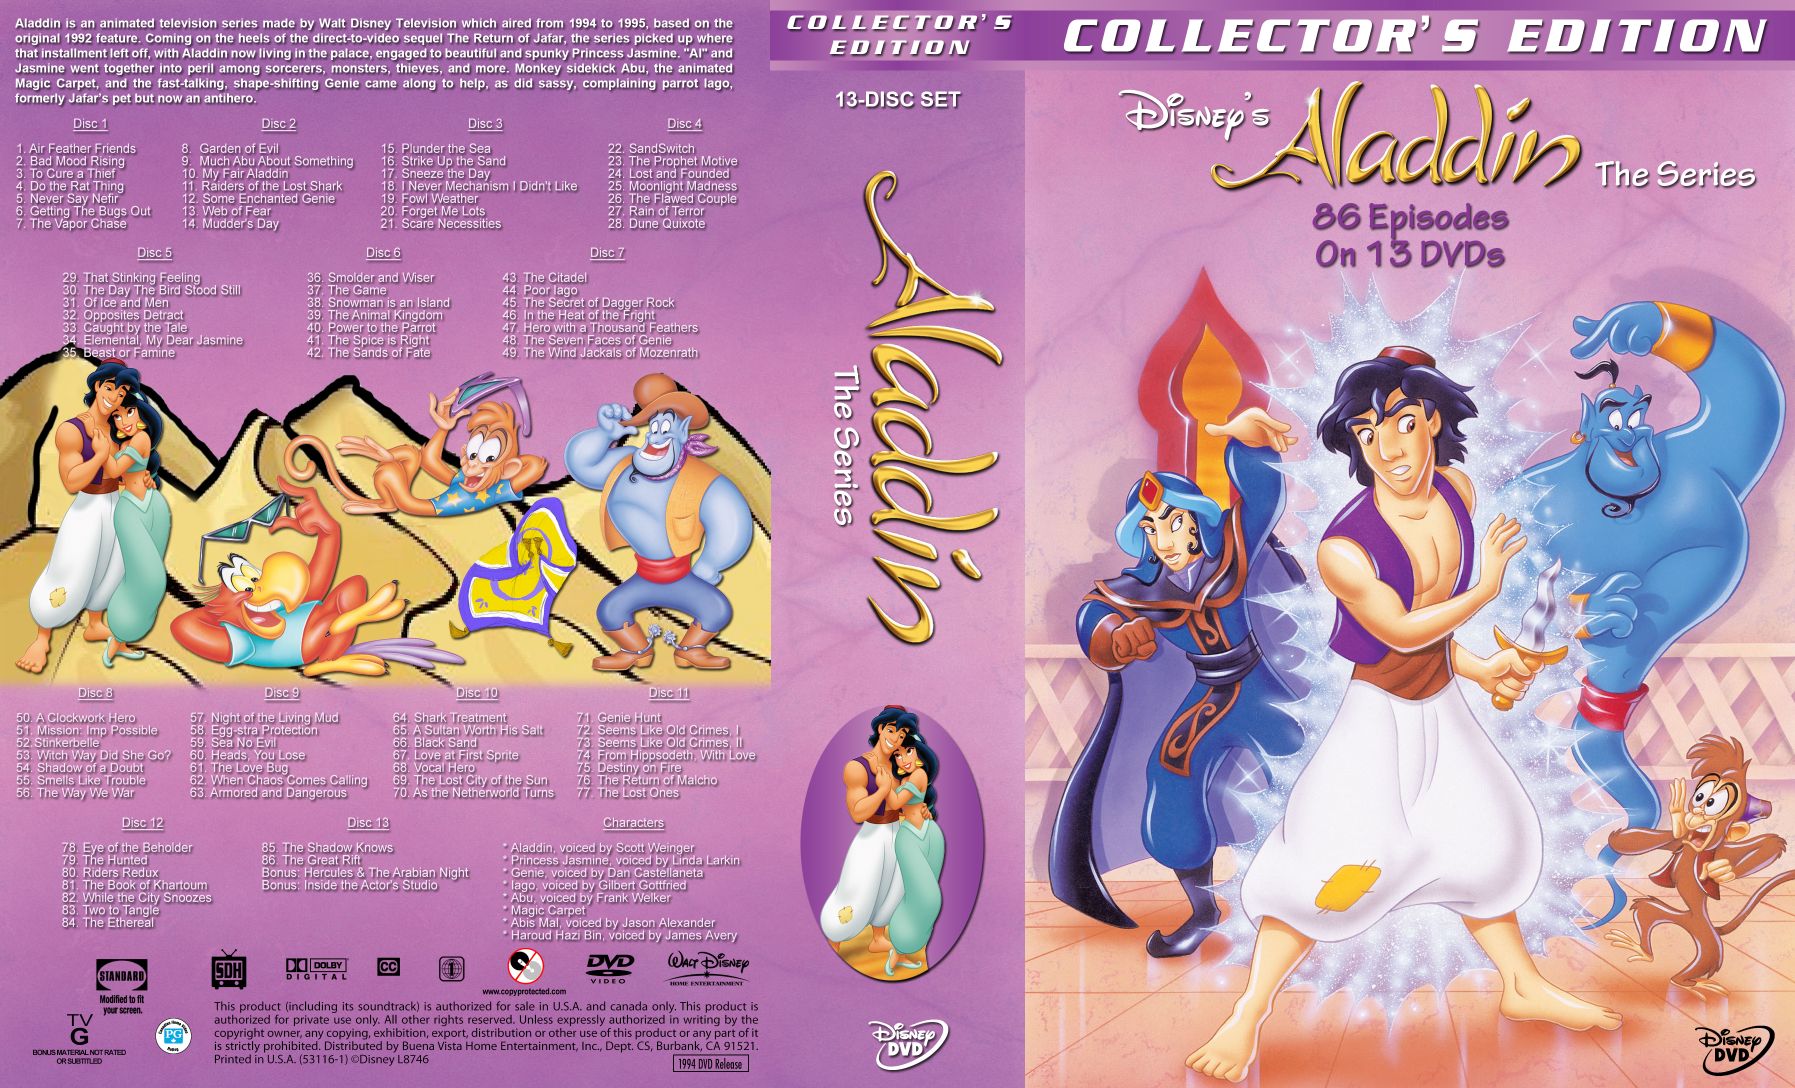 Aladdin Series Dvd Covers Cover Century Over 500 000 Album Art Covers For Free